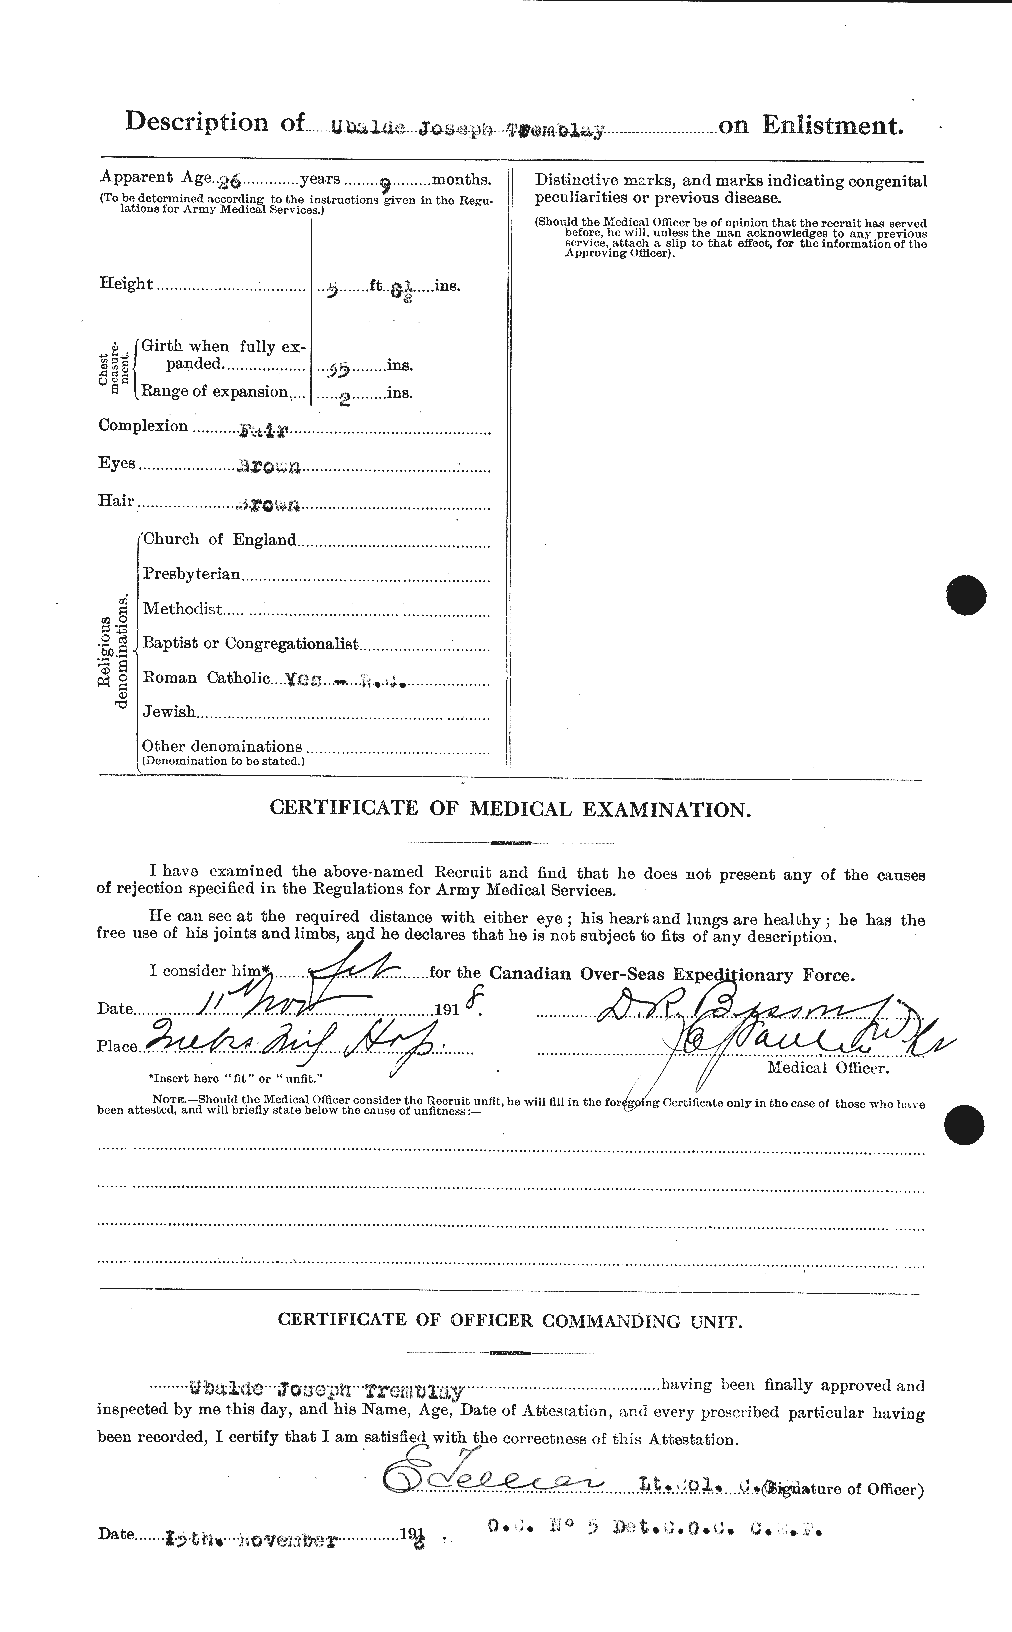 Personnel Records of the First World War - CEF 638328b